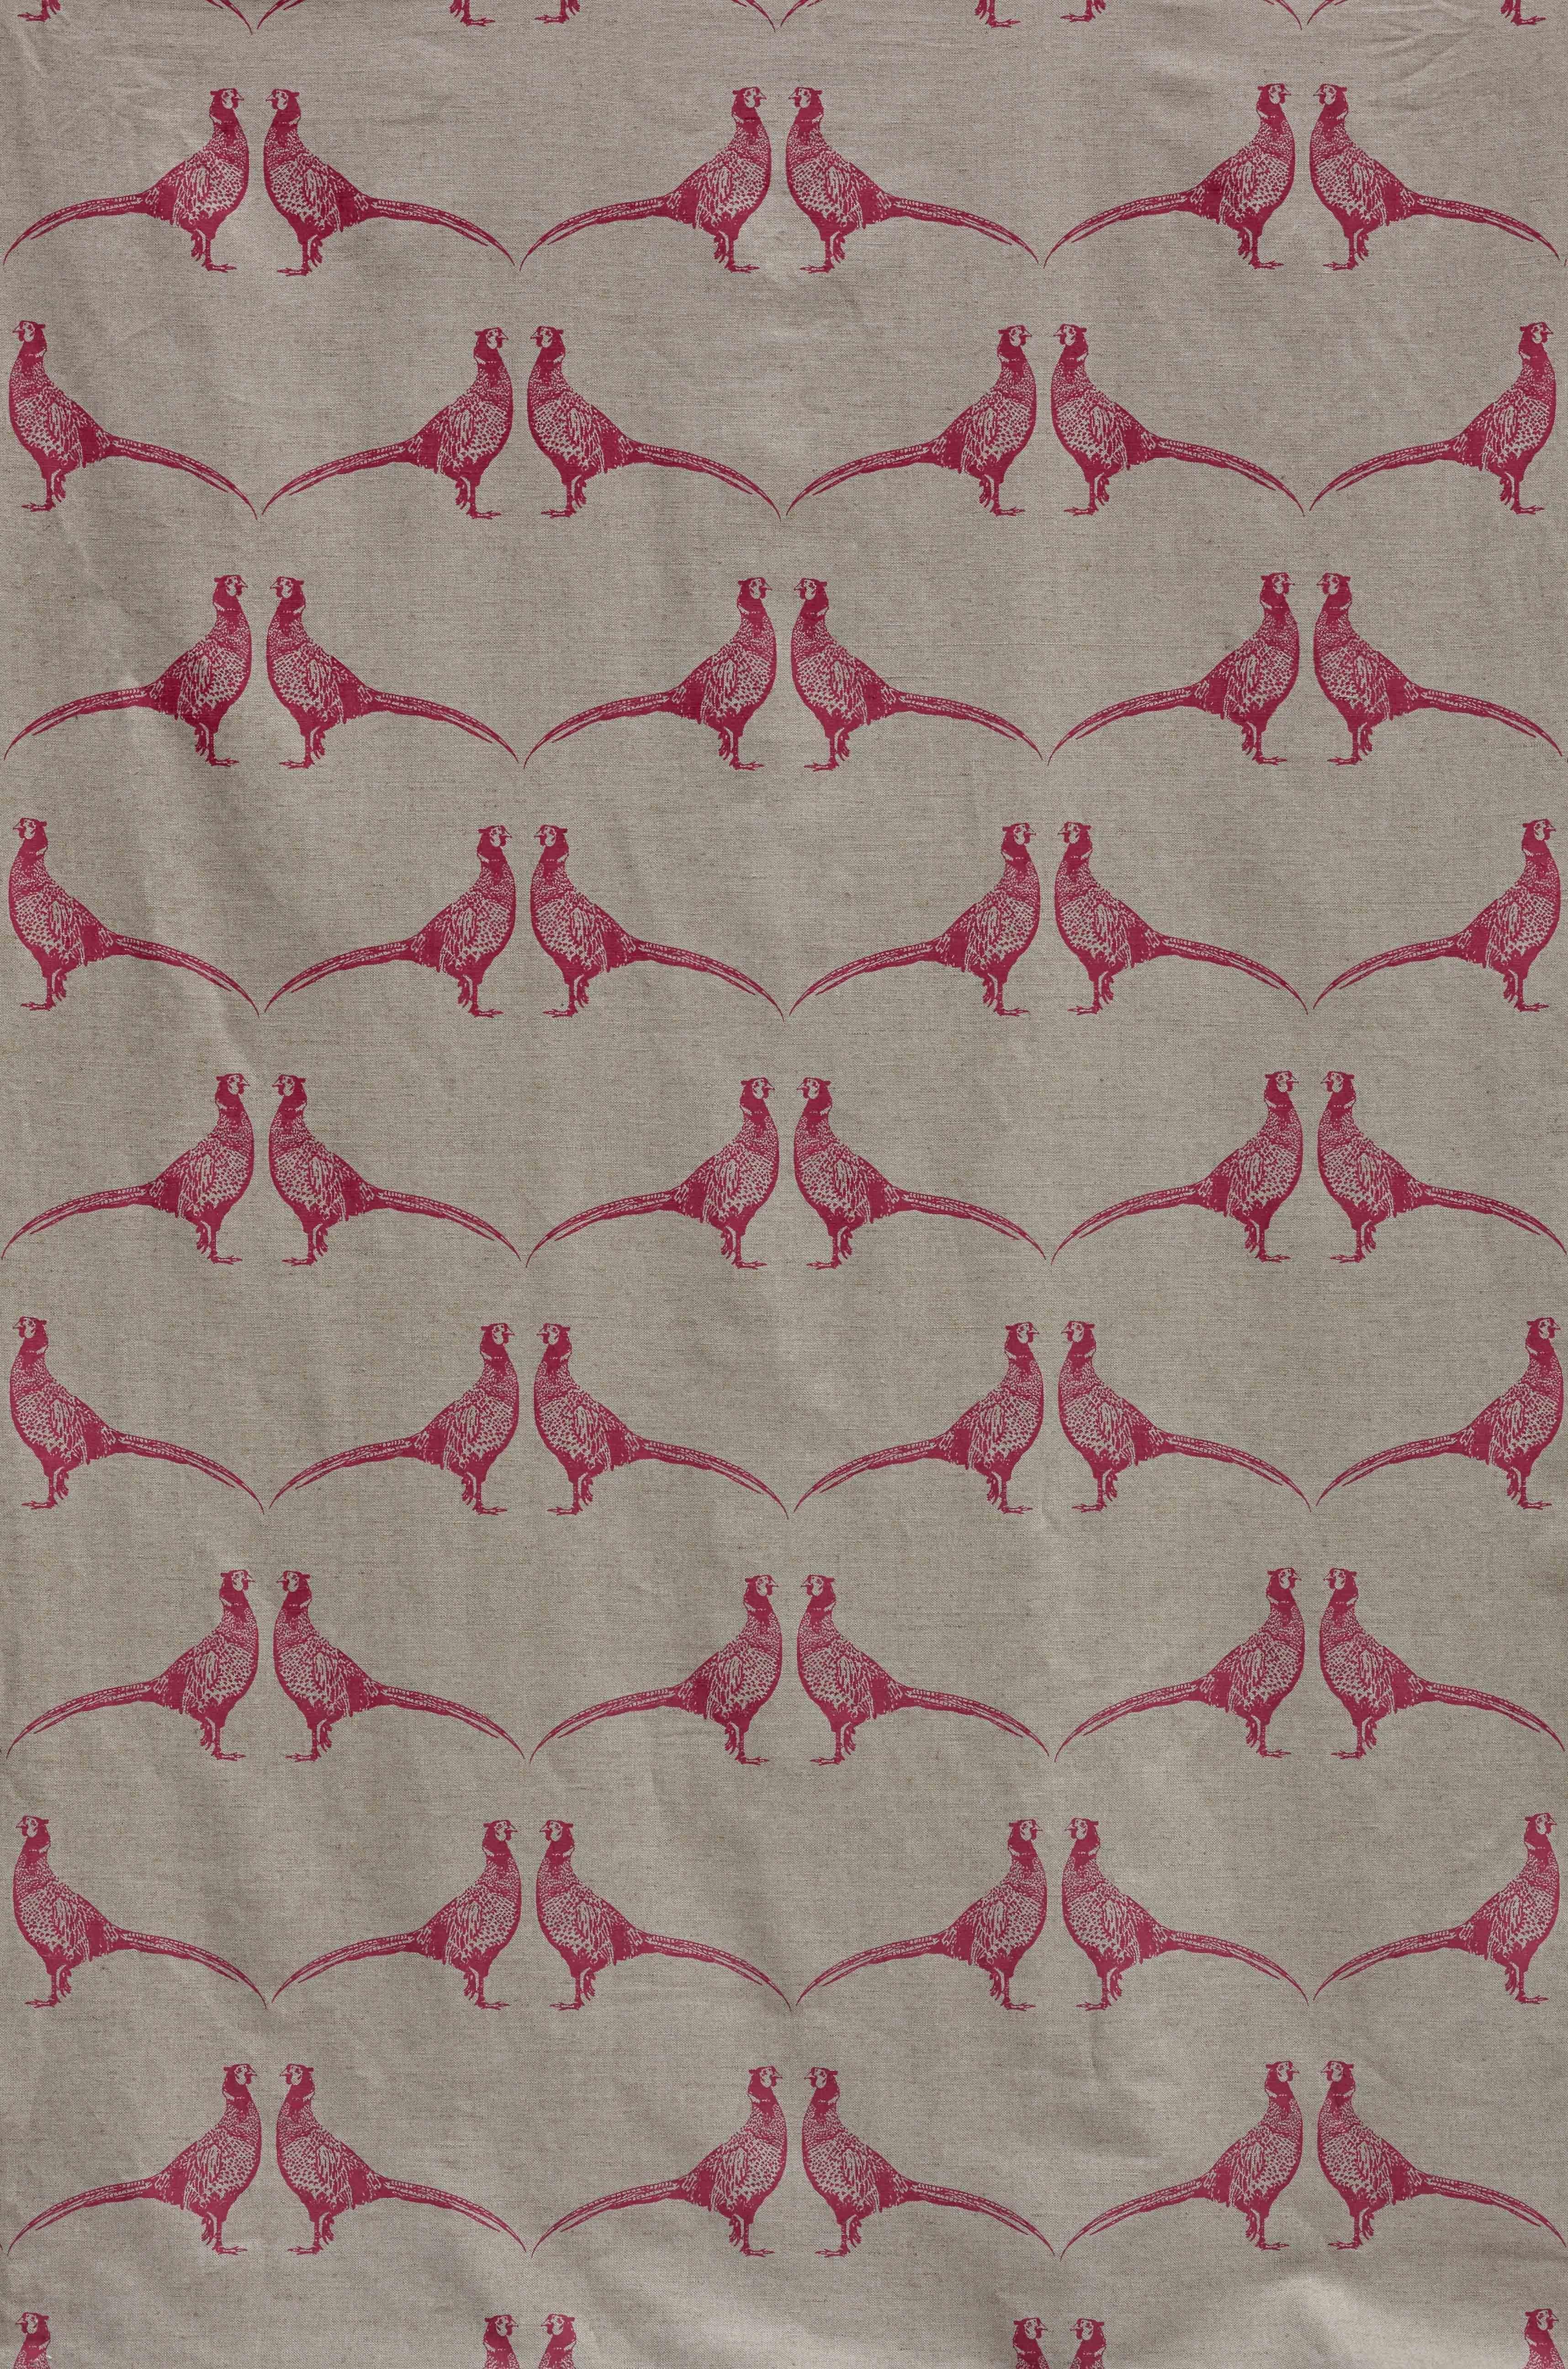 'Pheasant' Contemporary, Traditional Fabric in Pink on Cream For Sale 1